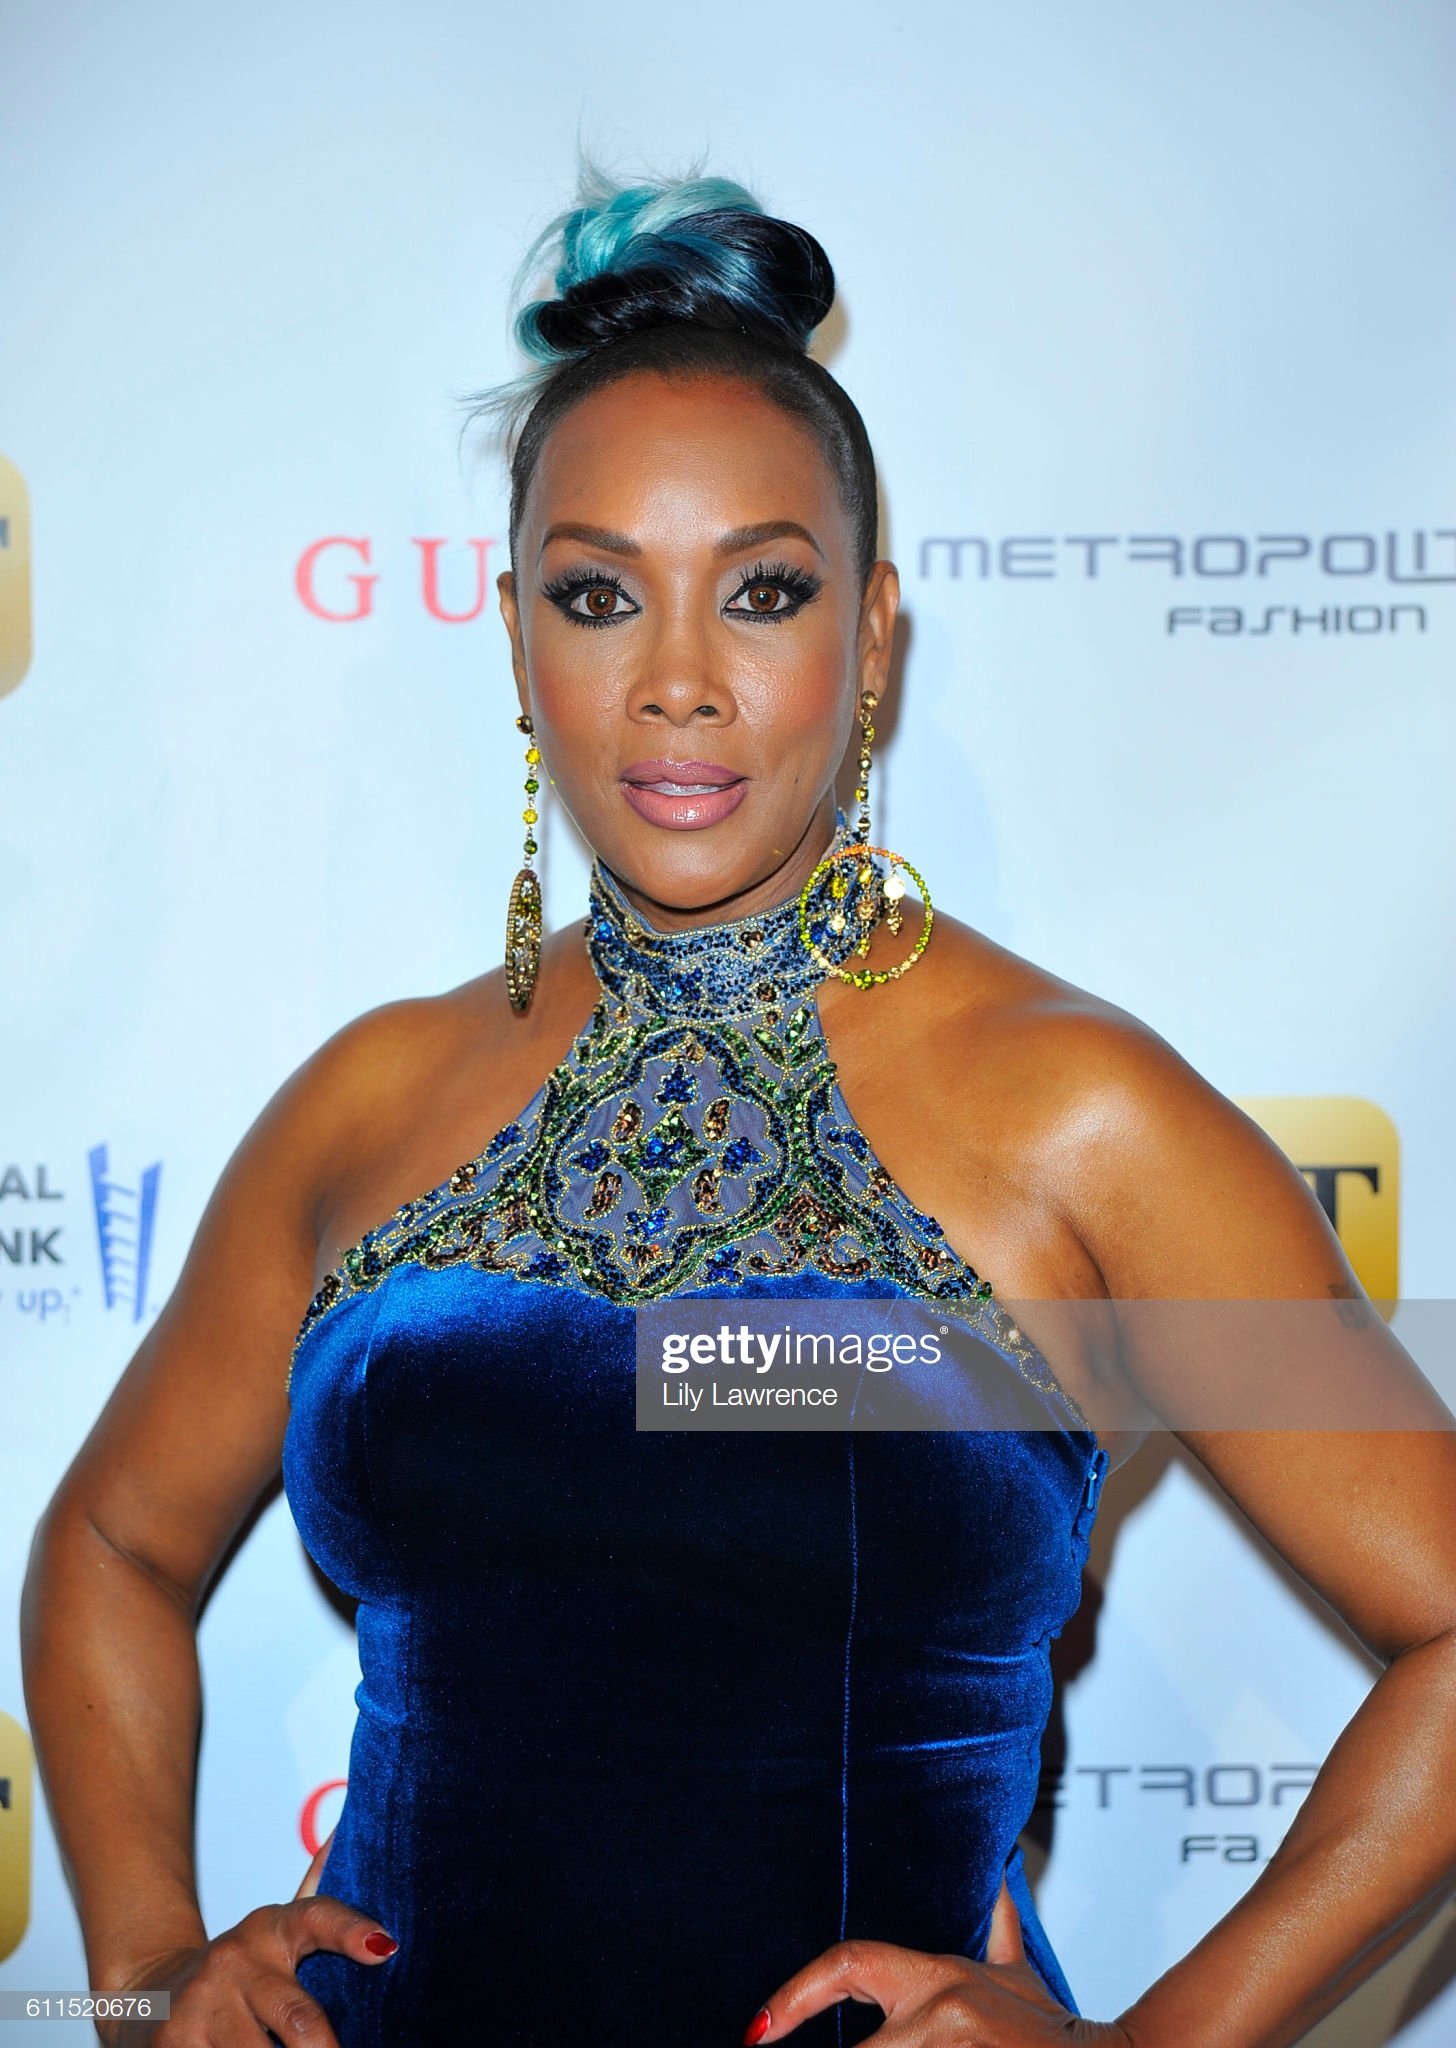  BURBANK, CA - SEPTEMBER 29:  Actress Vivica A. Fox attends Autism Speaks "La Vie En Blue" Fashion Gala at Warner Bros. Studios on September 29, 2016 in Burbank, California.  (Photo by Lily Lawrence/Getty Images for Autism Speaks) 